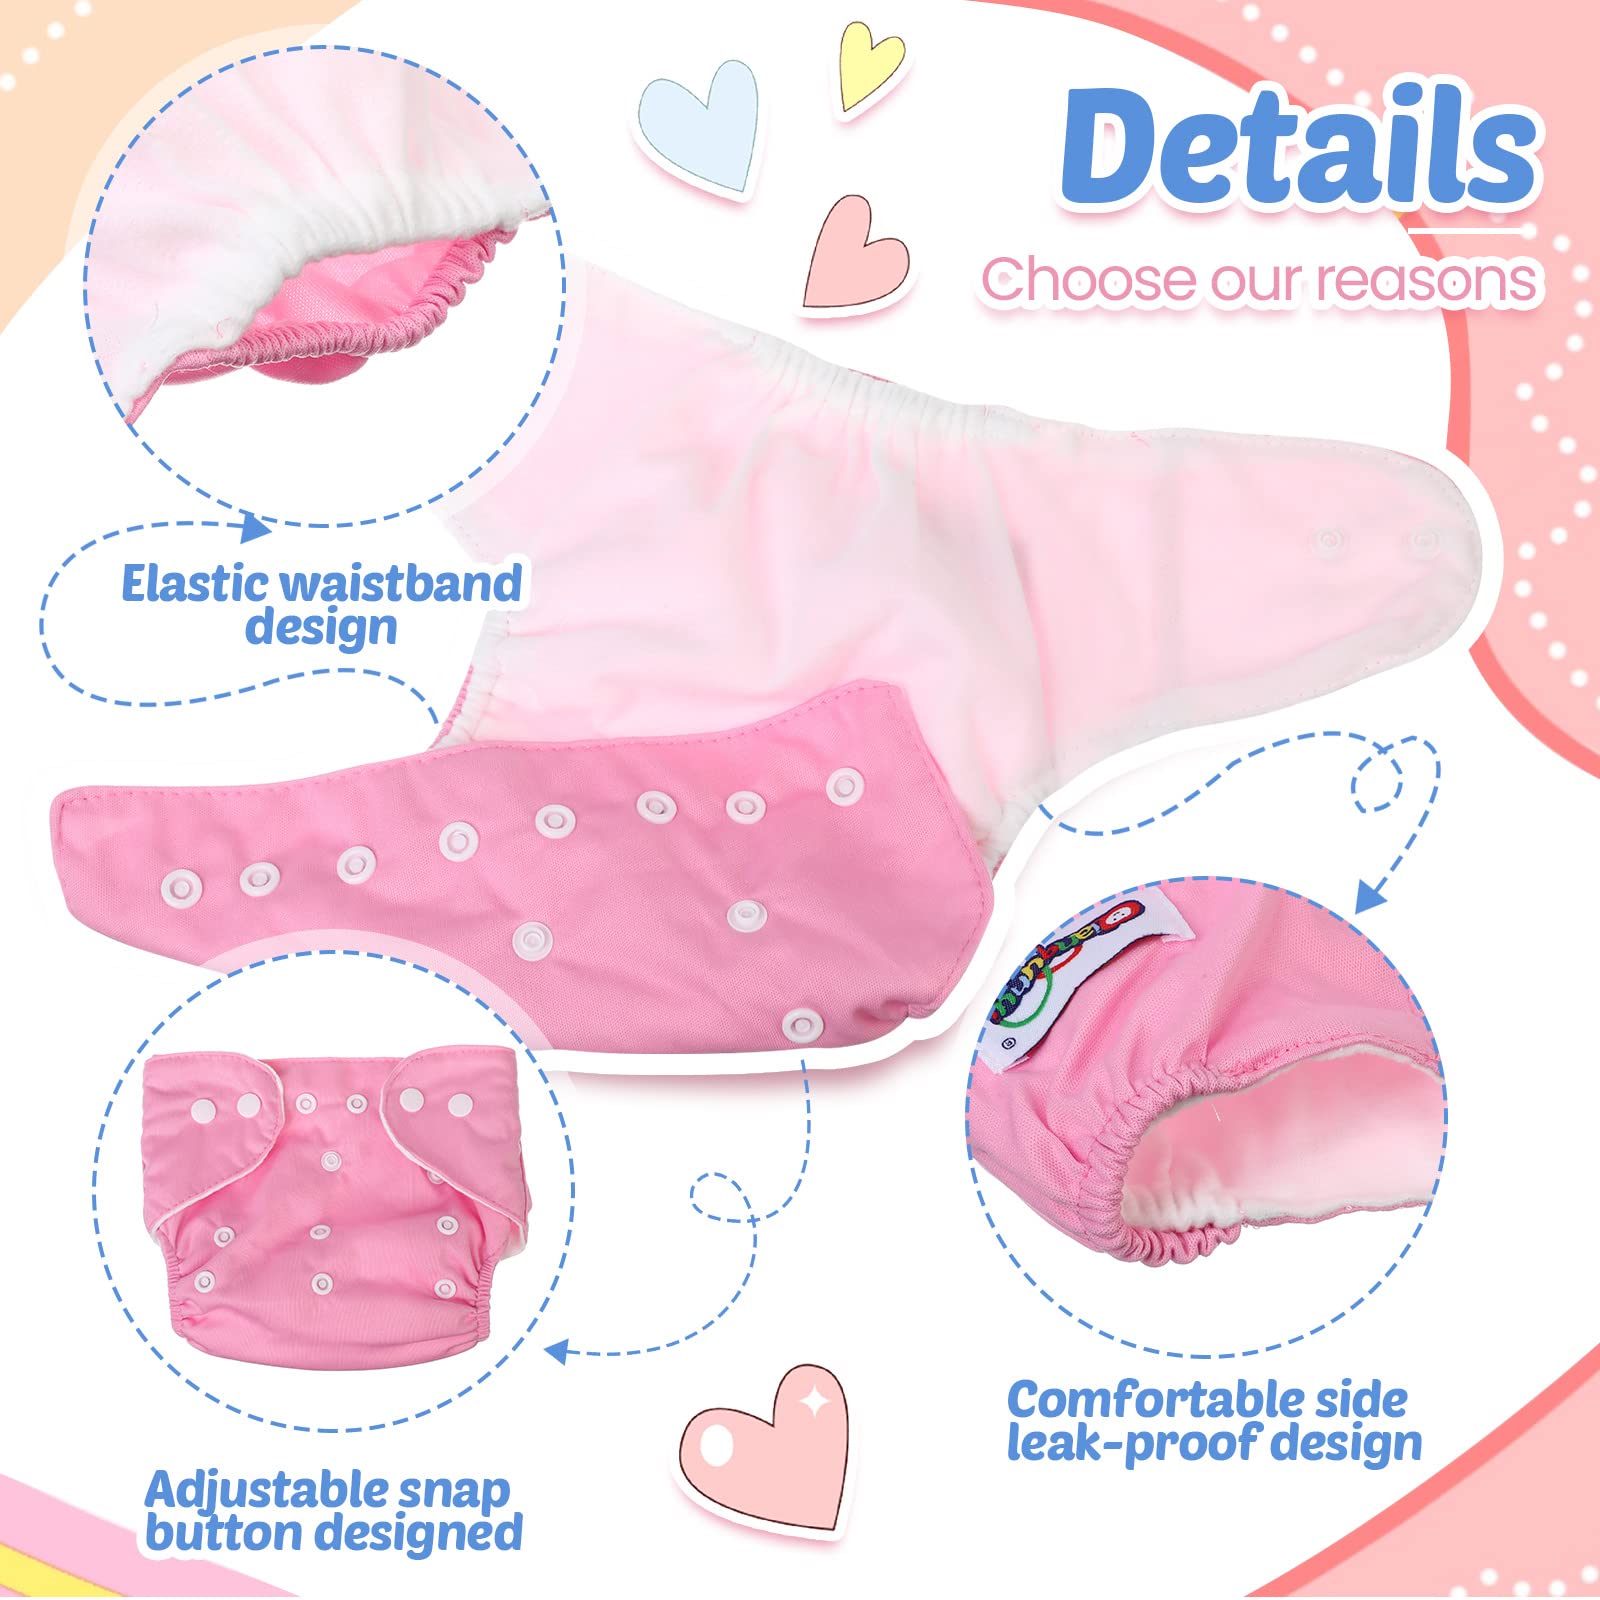 18 Pcs Baby Cloth Diapers Adjustable Reusable Cloth Diapers One Size Washable Nappy Covers Baby Cloth Pocket for Newborn Toddlers Boys Girls 8-25 Pound (No Inserts)